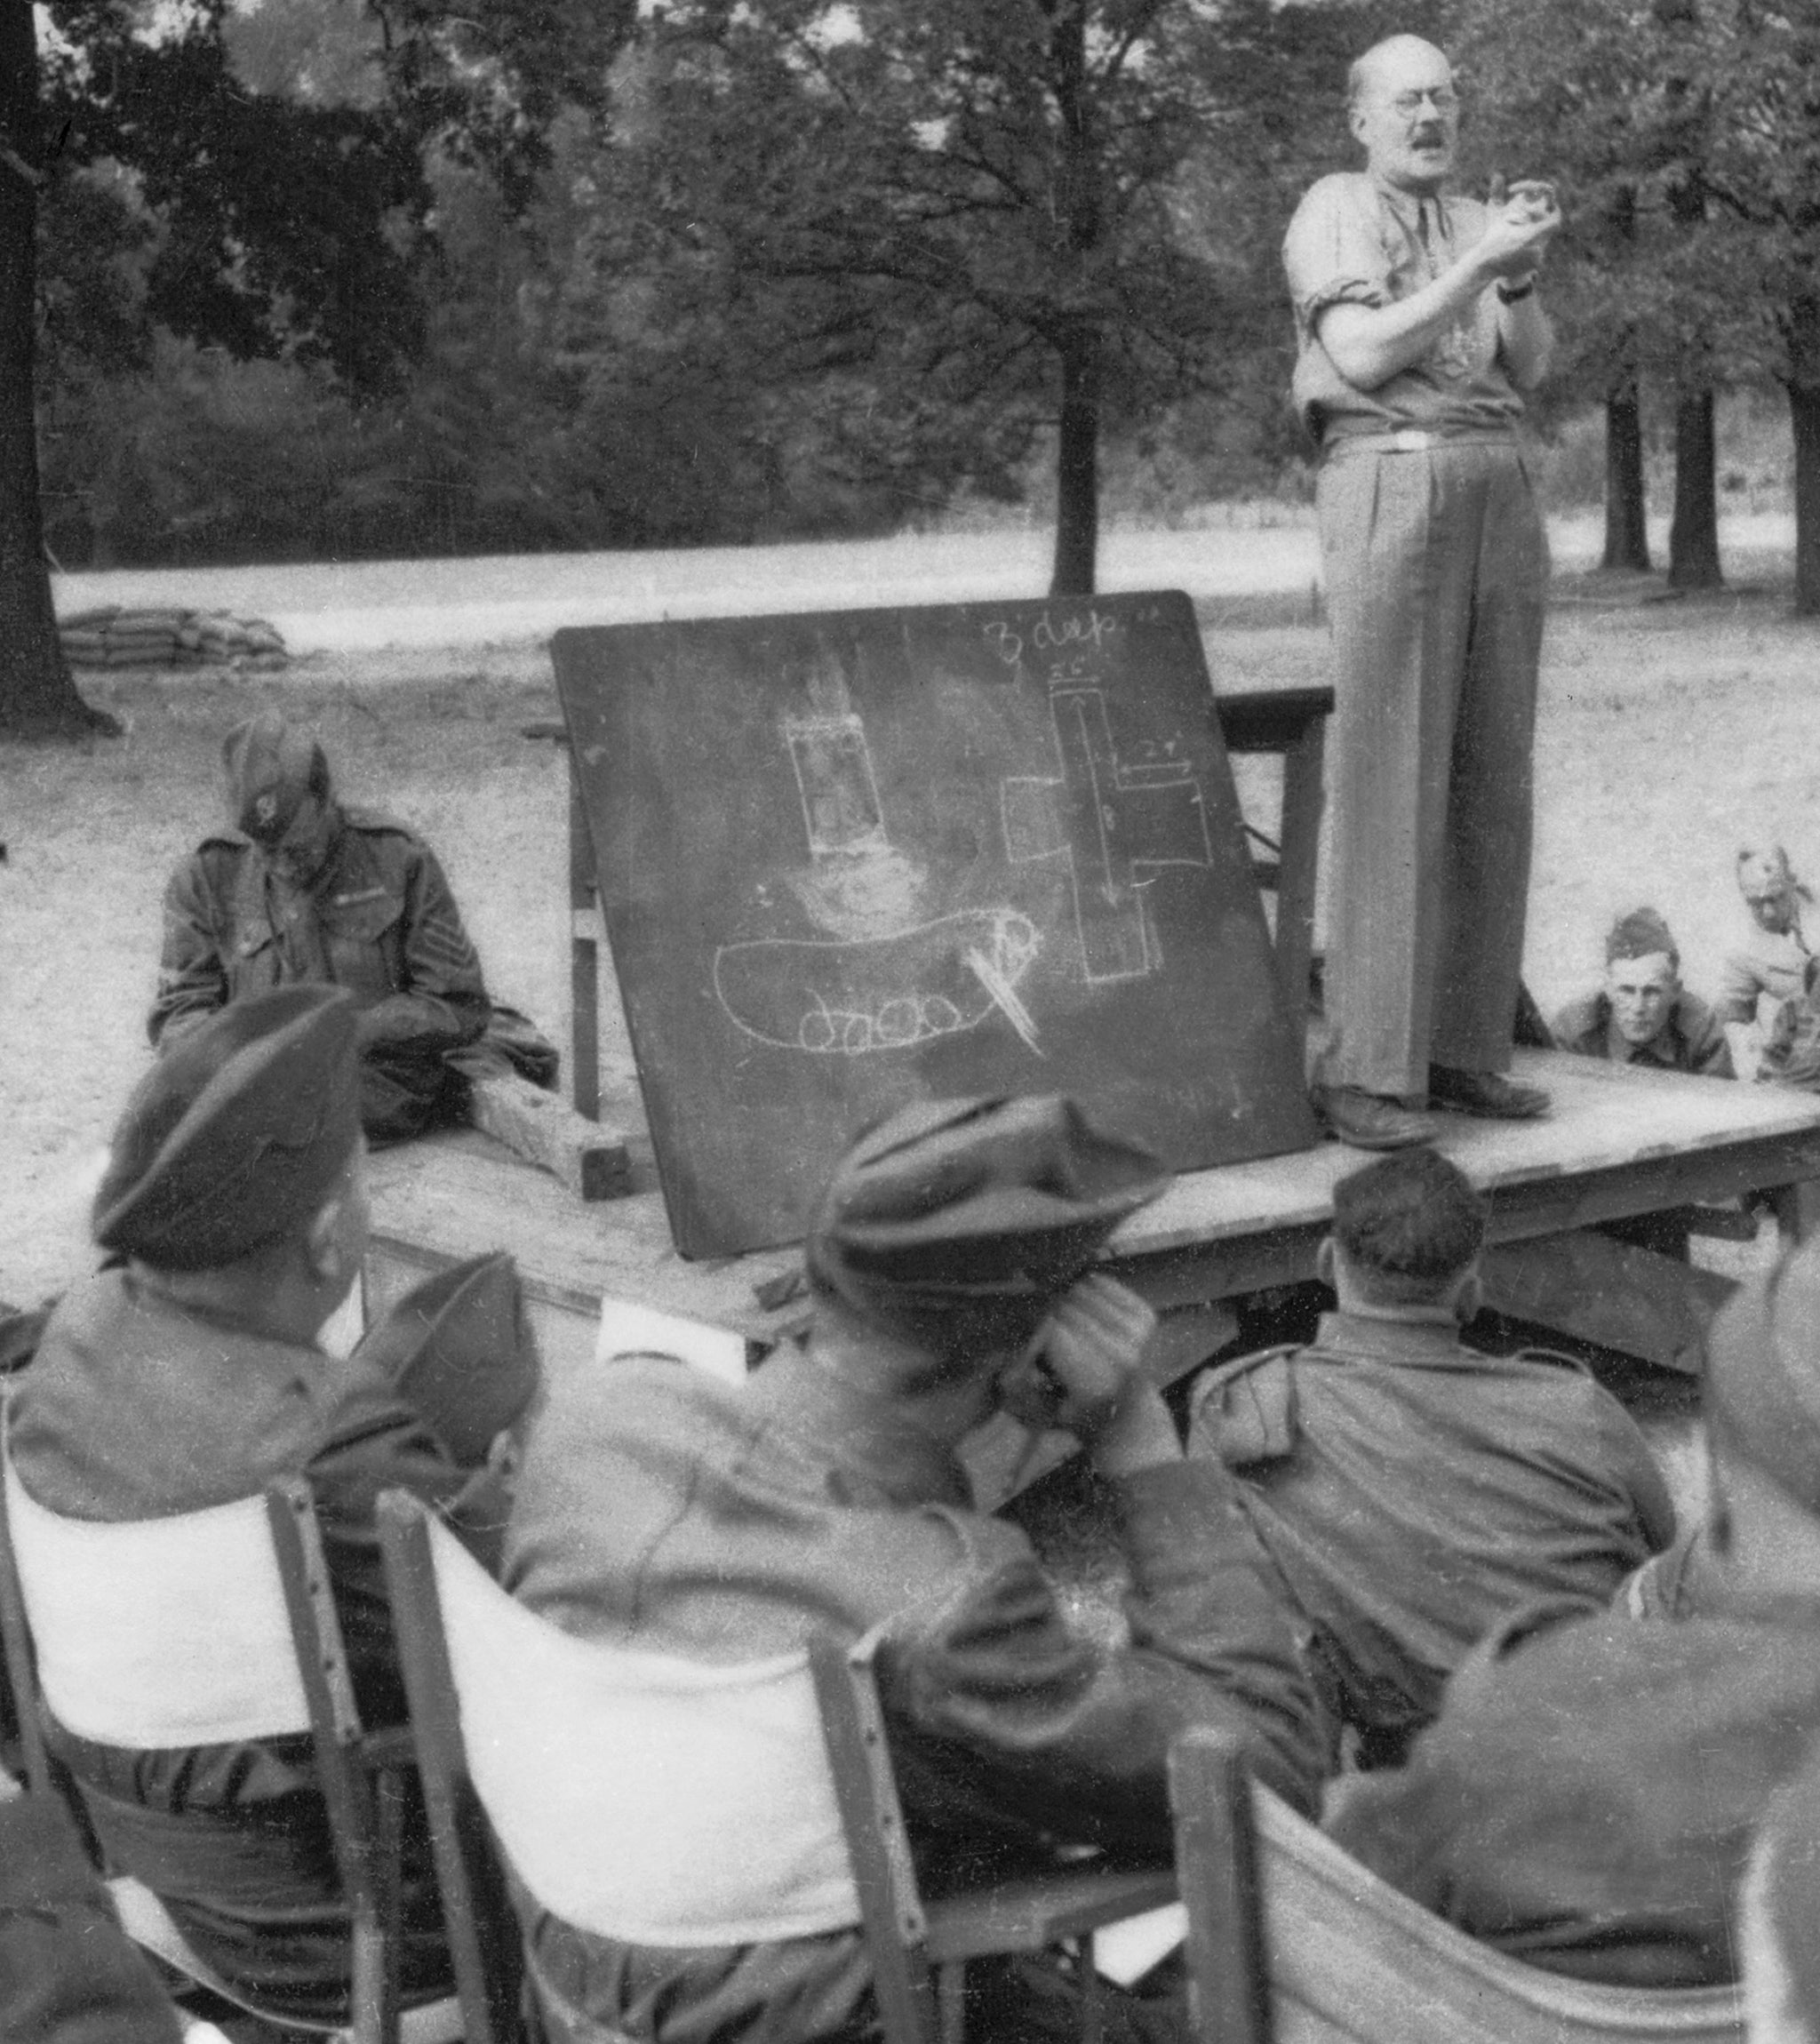 Tom Wintringham lectures on tank sabotage at Osterley Park in 1940